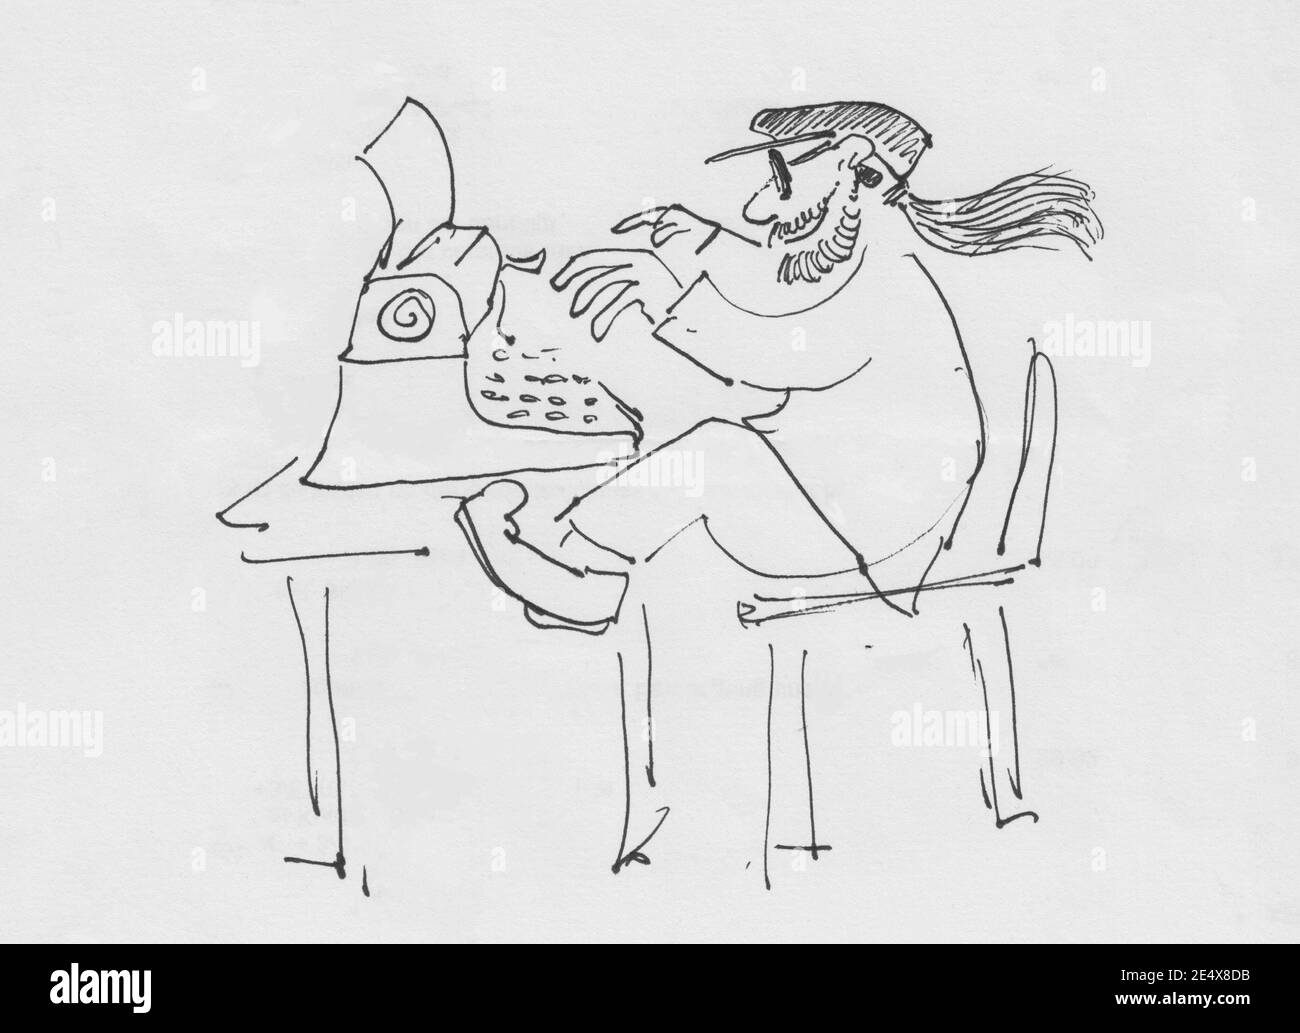 Cartoon of a writer who is enthusiastic writing a book on an old fashioned typewriter Stock Photo